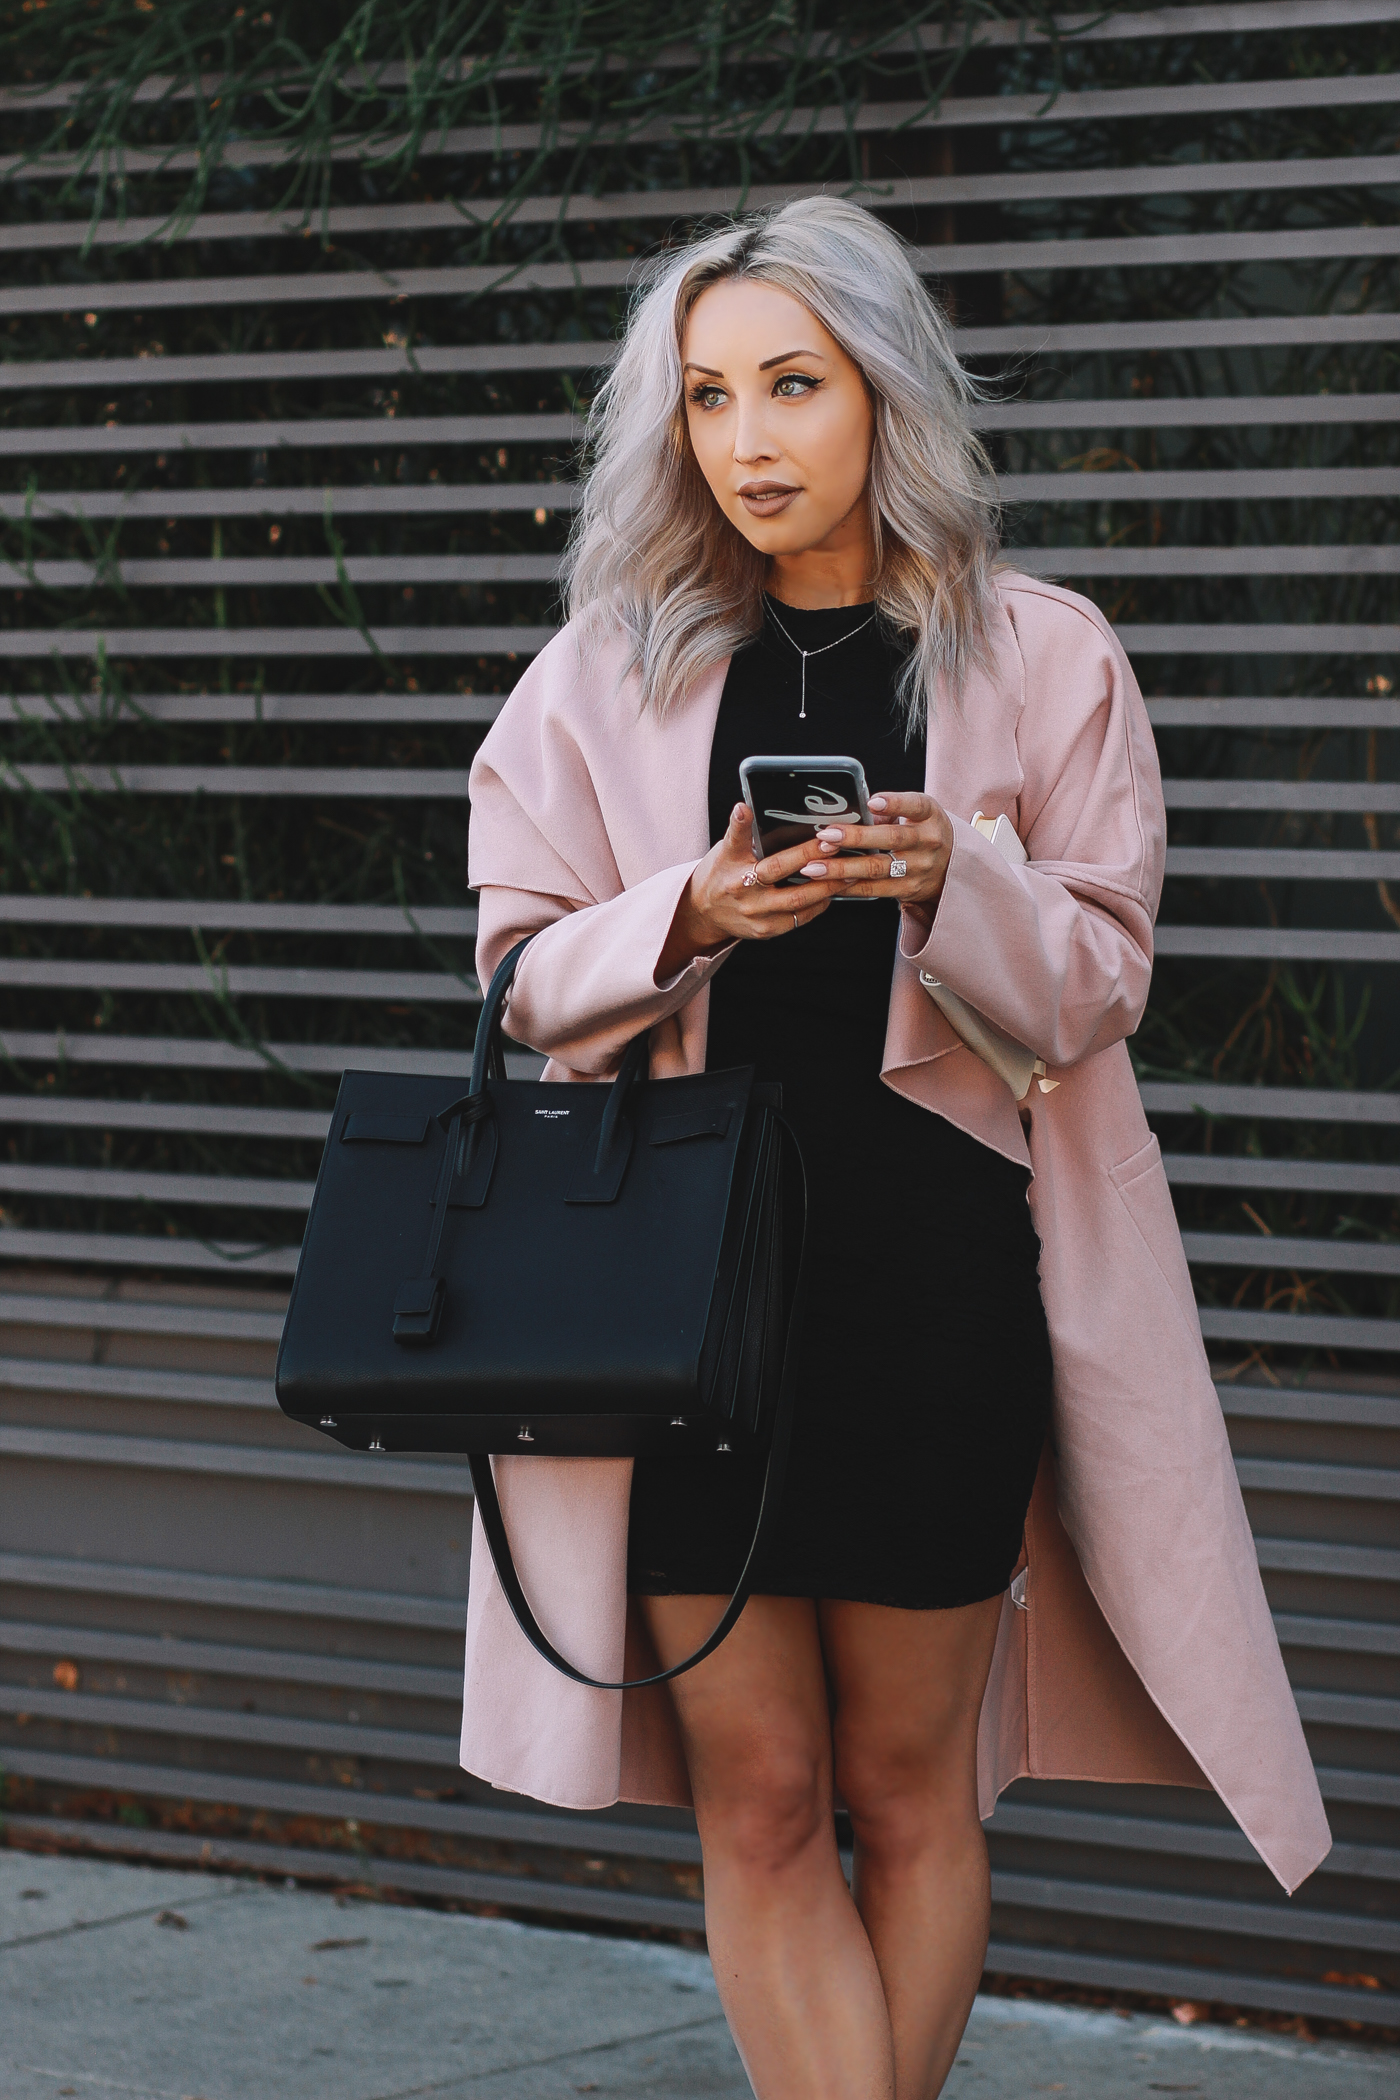 Blondie in the City | Busy Bride | Beverly Hills Street Style | #BusyBride Notebook | Bride iPhone Case @casetify